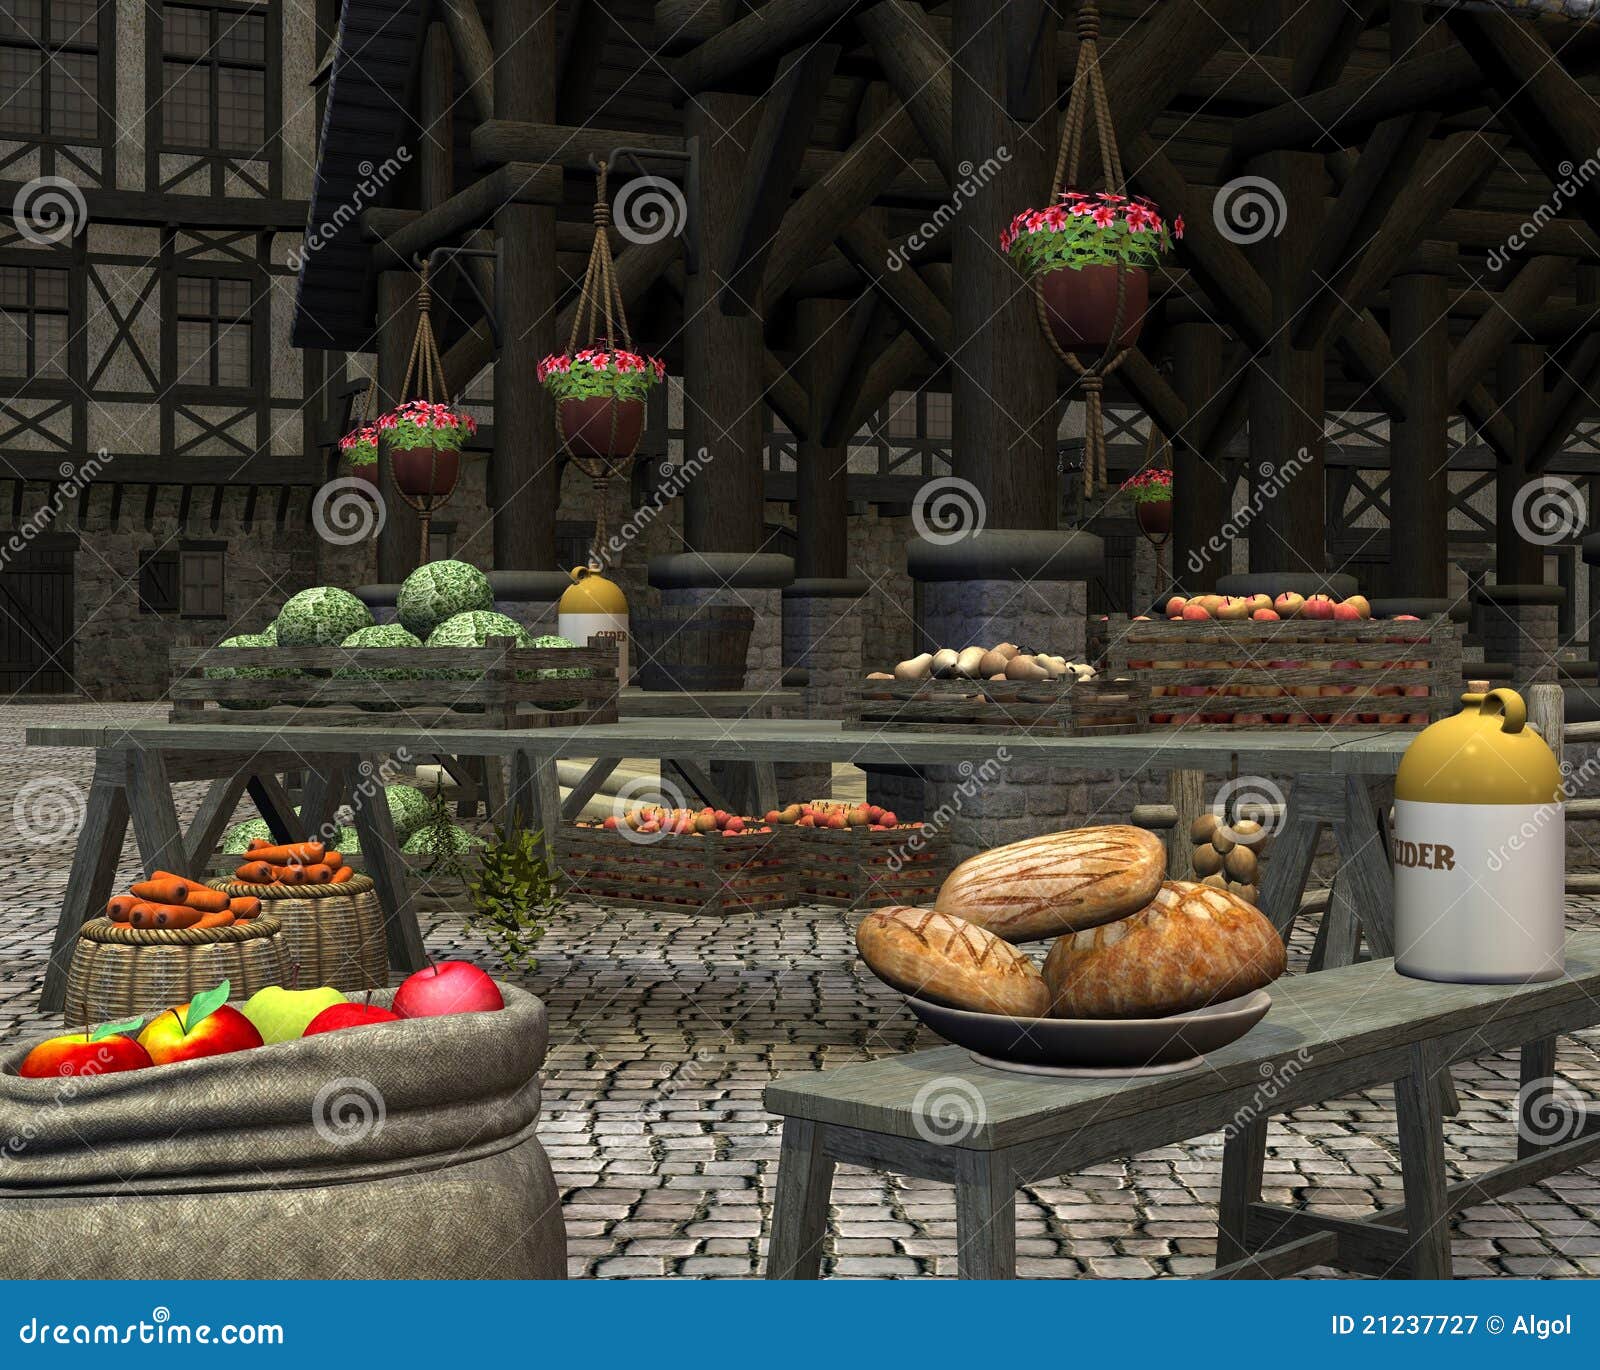 Farmers Market In A Medieval Marketplace Royalty Free Stock Photography